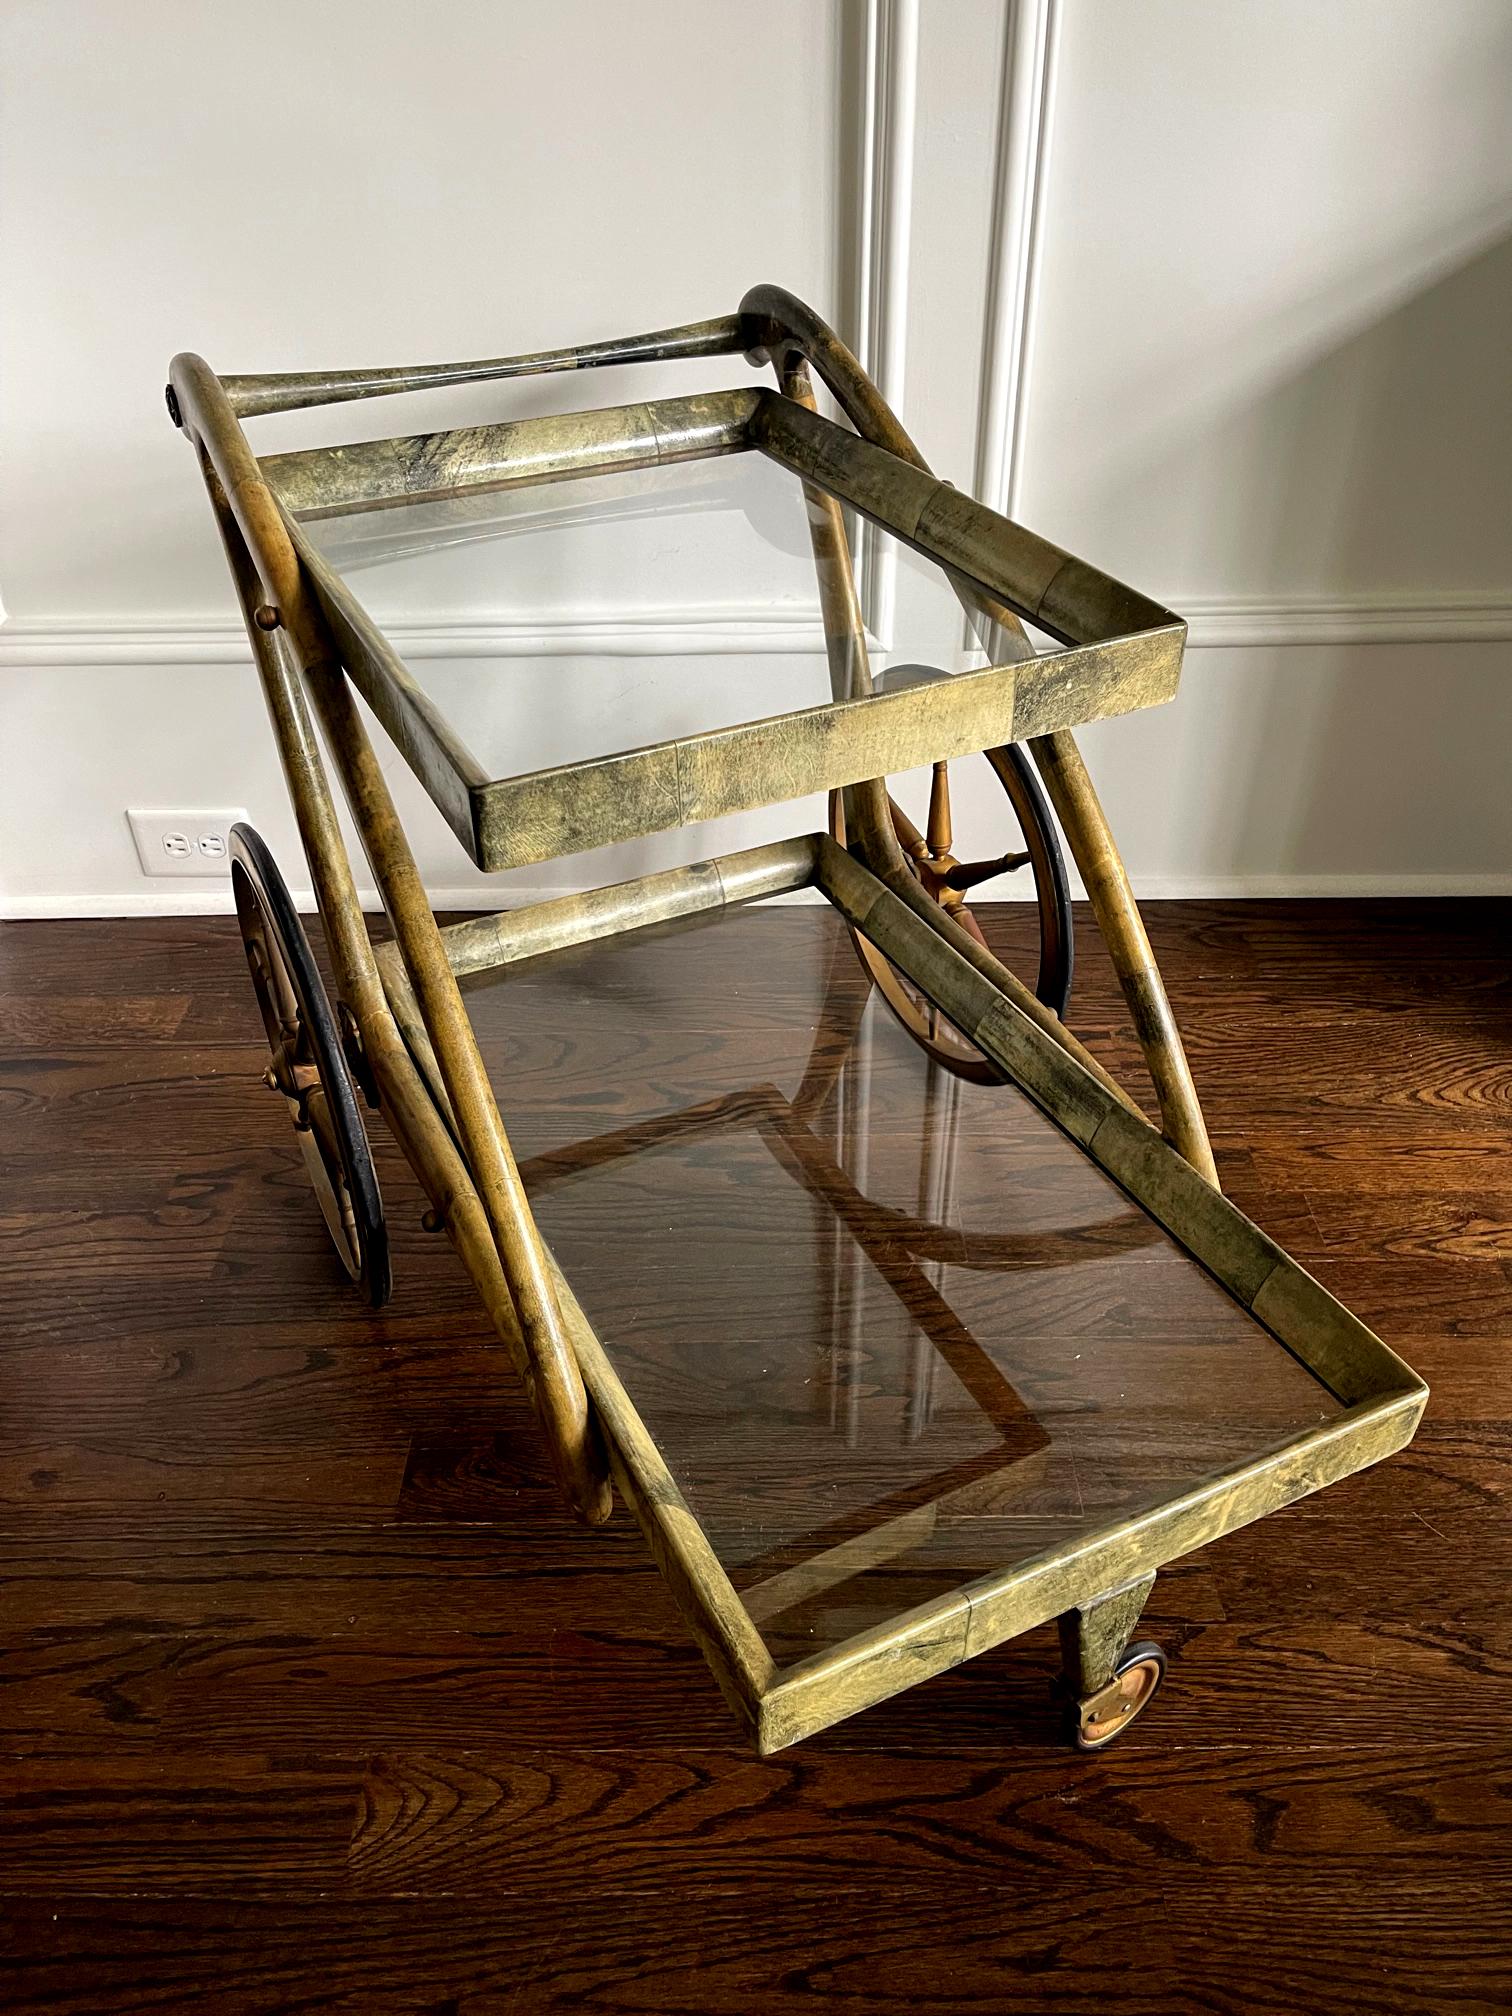 A beautiful and functional service bar cart by Italian designer Aldo Tura (1909-1963) circa 1950-60s. The glamorous design embodies the jetsetter's lifestyle of the mid-20th century when the luxury lies in the exotic material and craftmanship. The